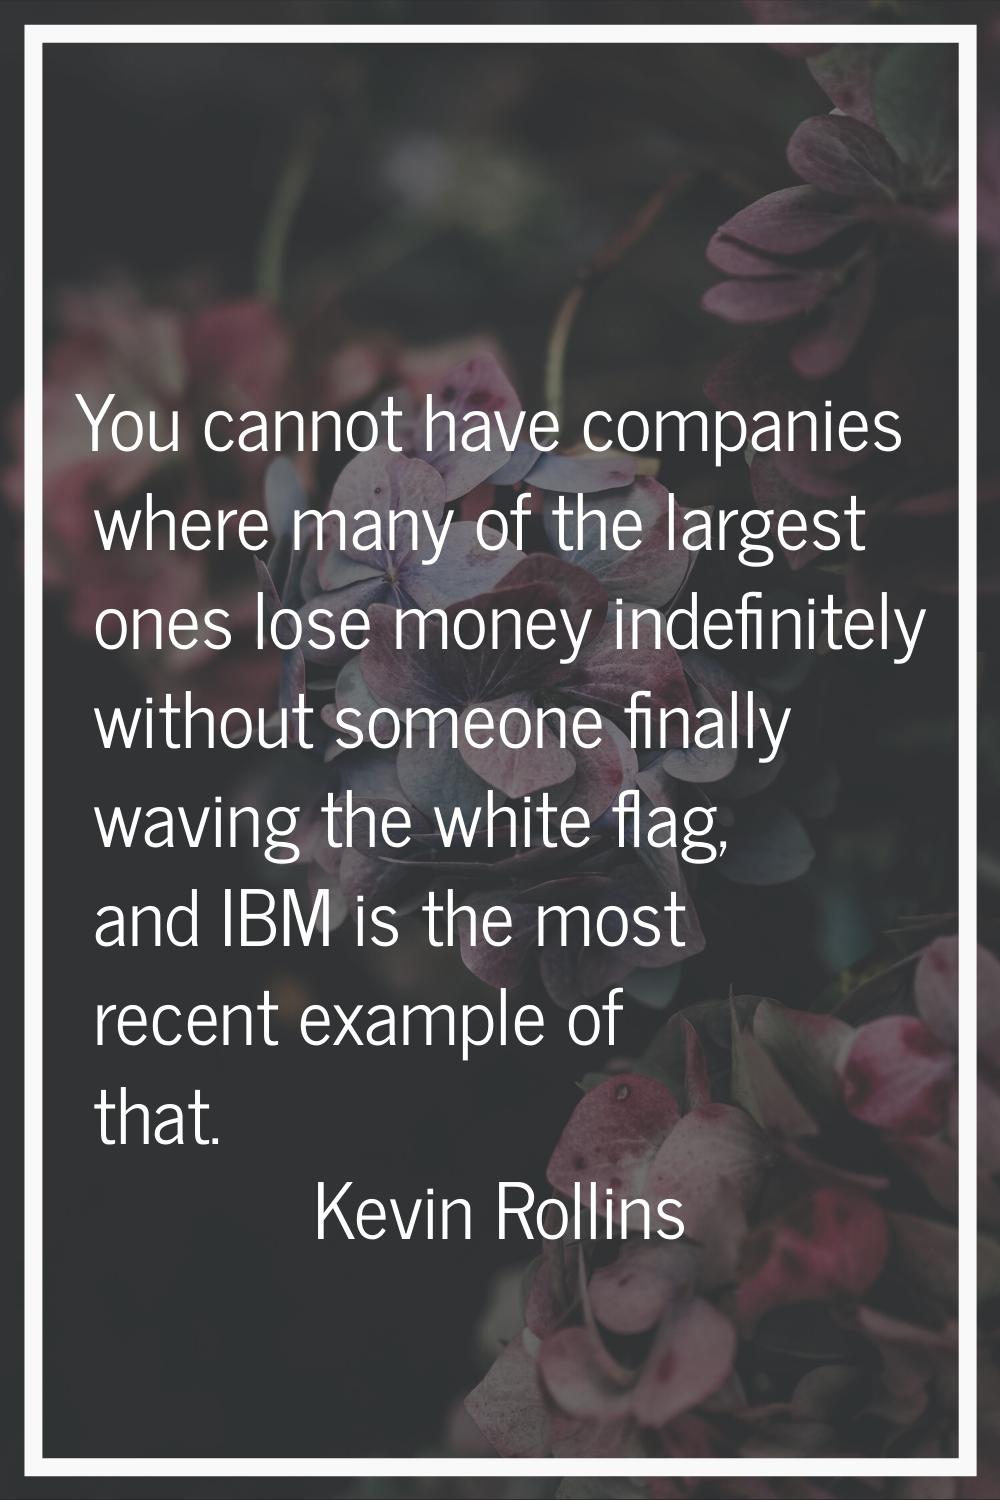 You cannot have companies where many of the largest ones lose money indefinitely without someone fi